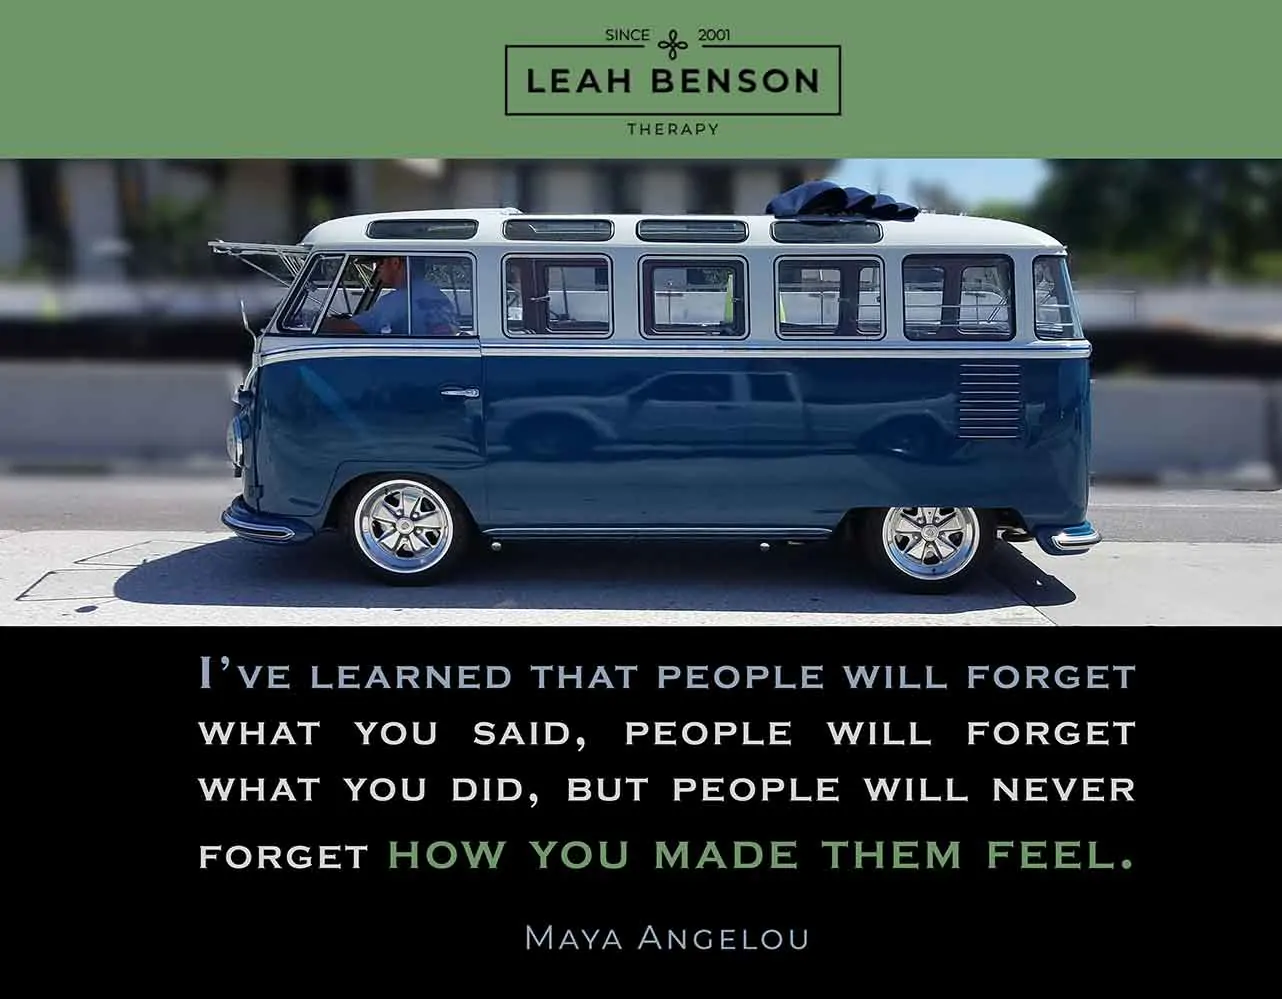 "I've learned that people will forget what you said, people will forget what you did, but people will never forget how you made them feel." Quote by Maya Angelou. Photo of custom blue VW van.